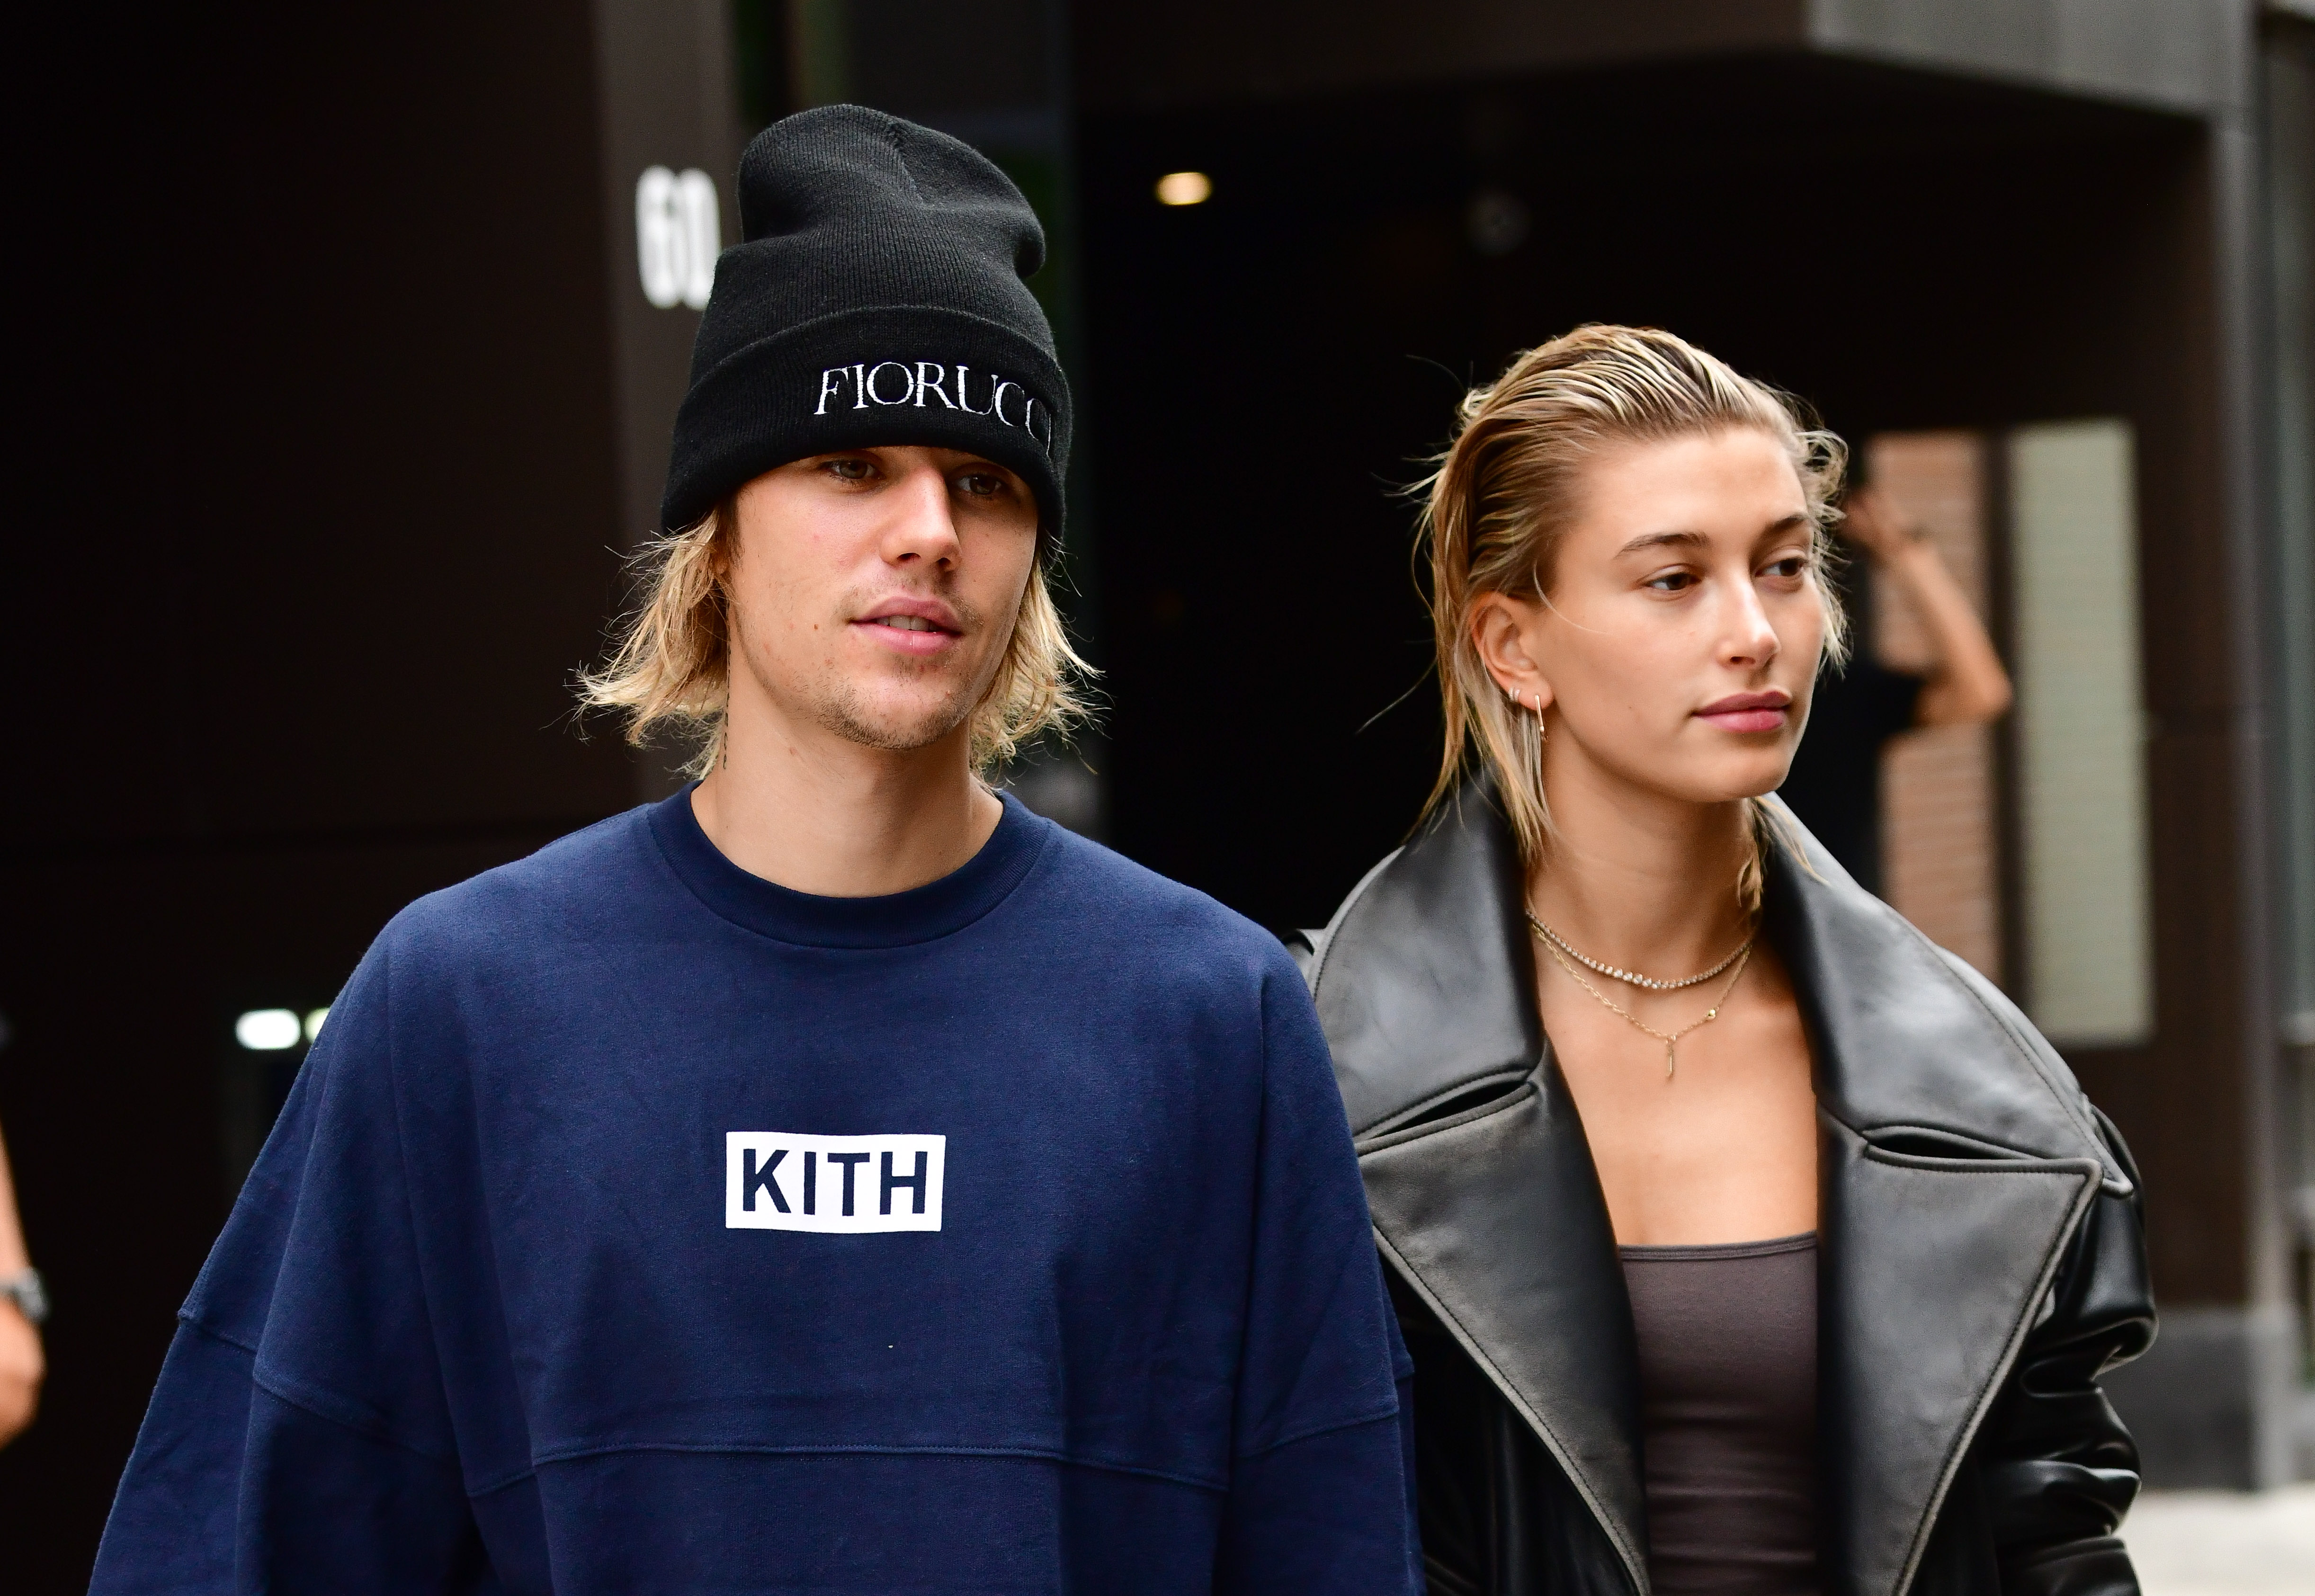 Hailey and Justin celebrated their fifth wedding anniversary in September